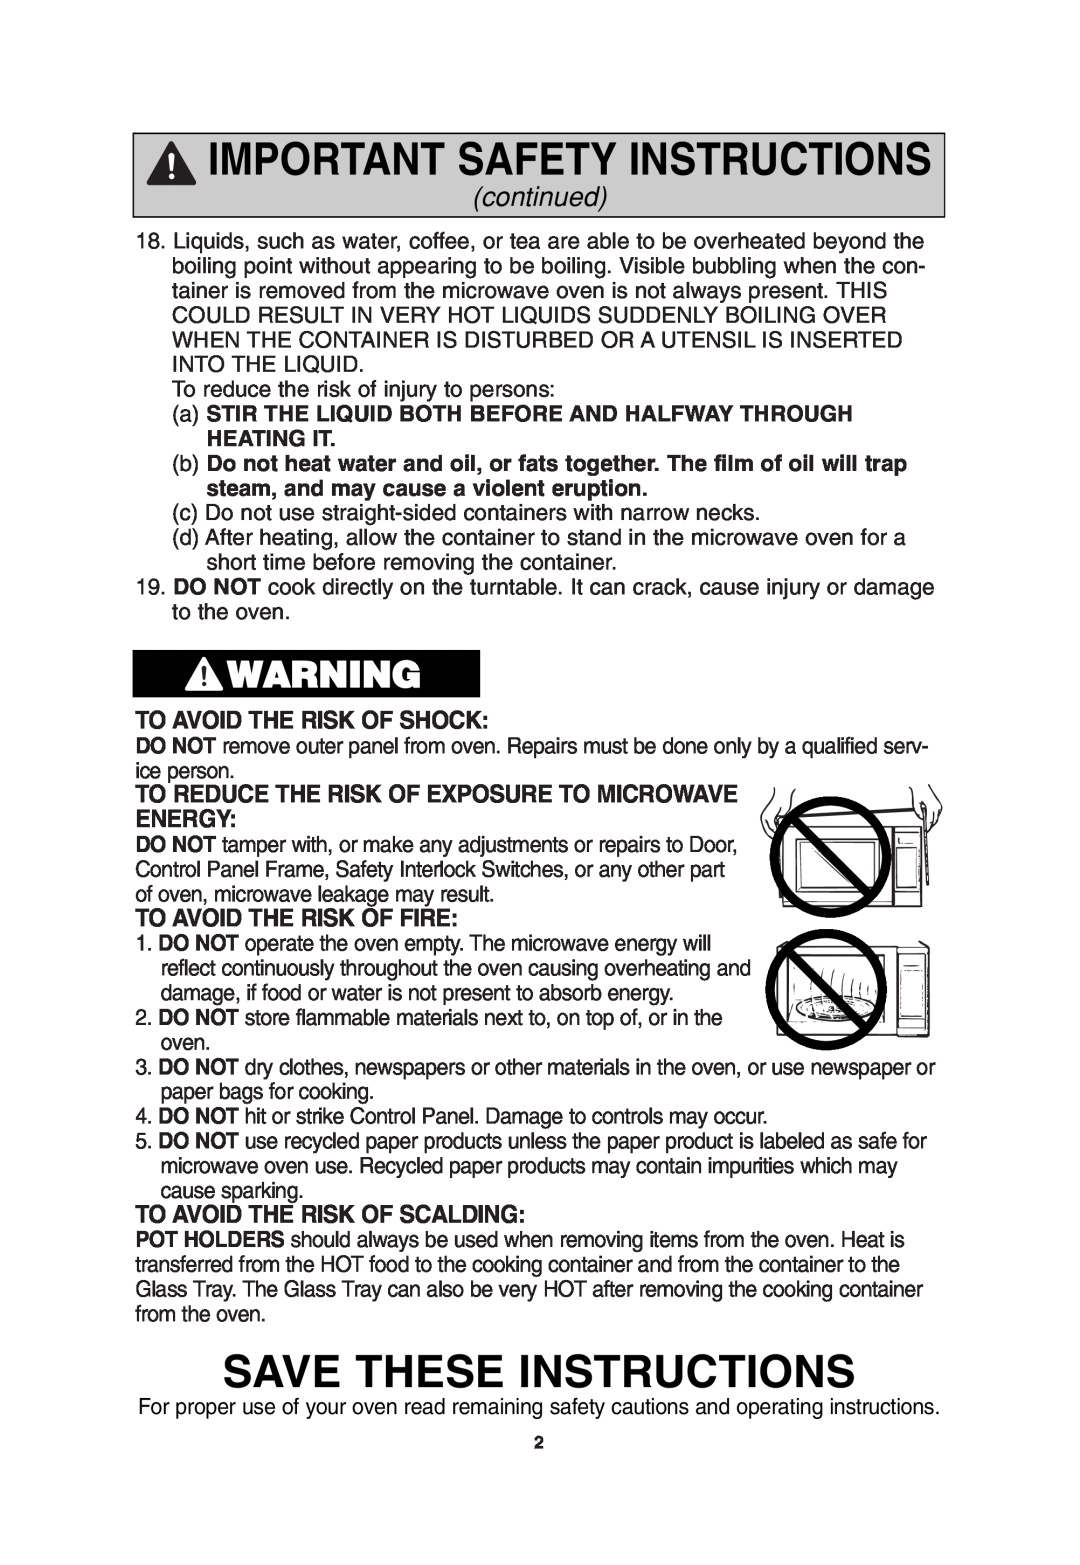 Panasonic NN-T685 Save These Instructions, continued, To Avoid The Risk Of Shock, Energy, To Avoid The Risk Of Fire 